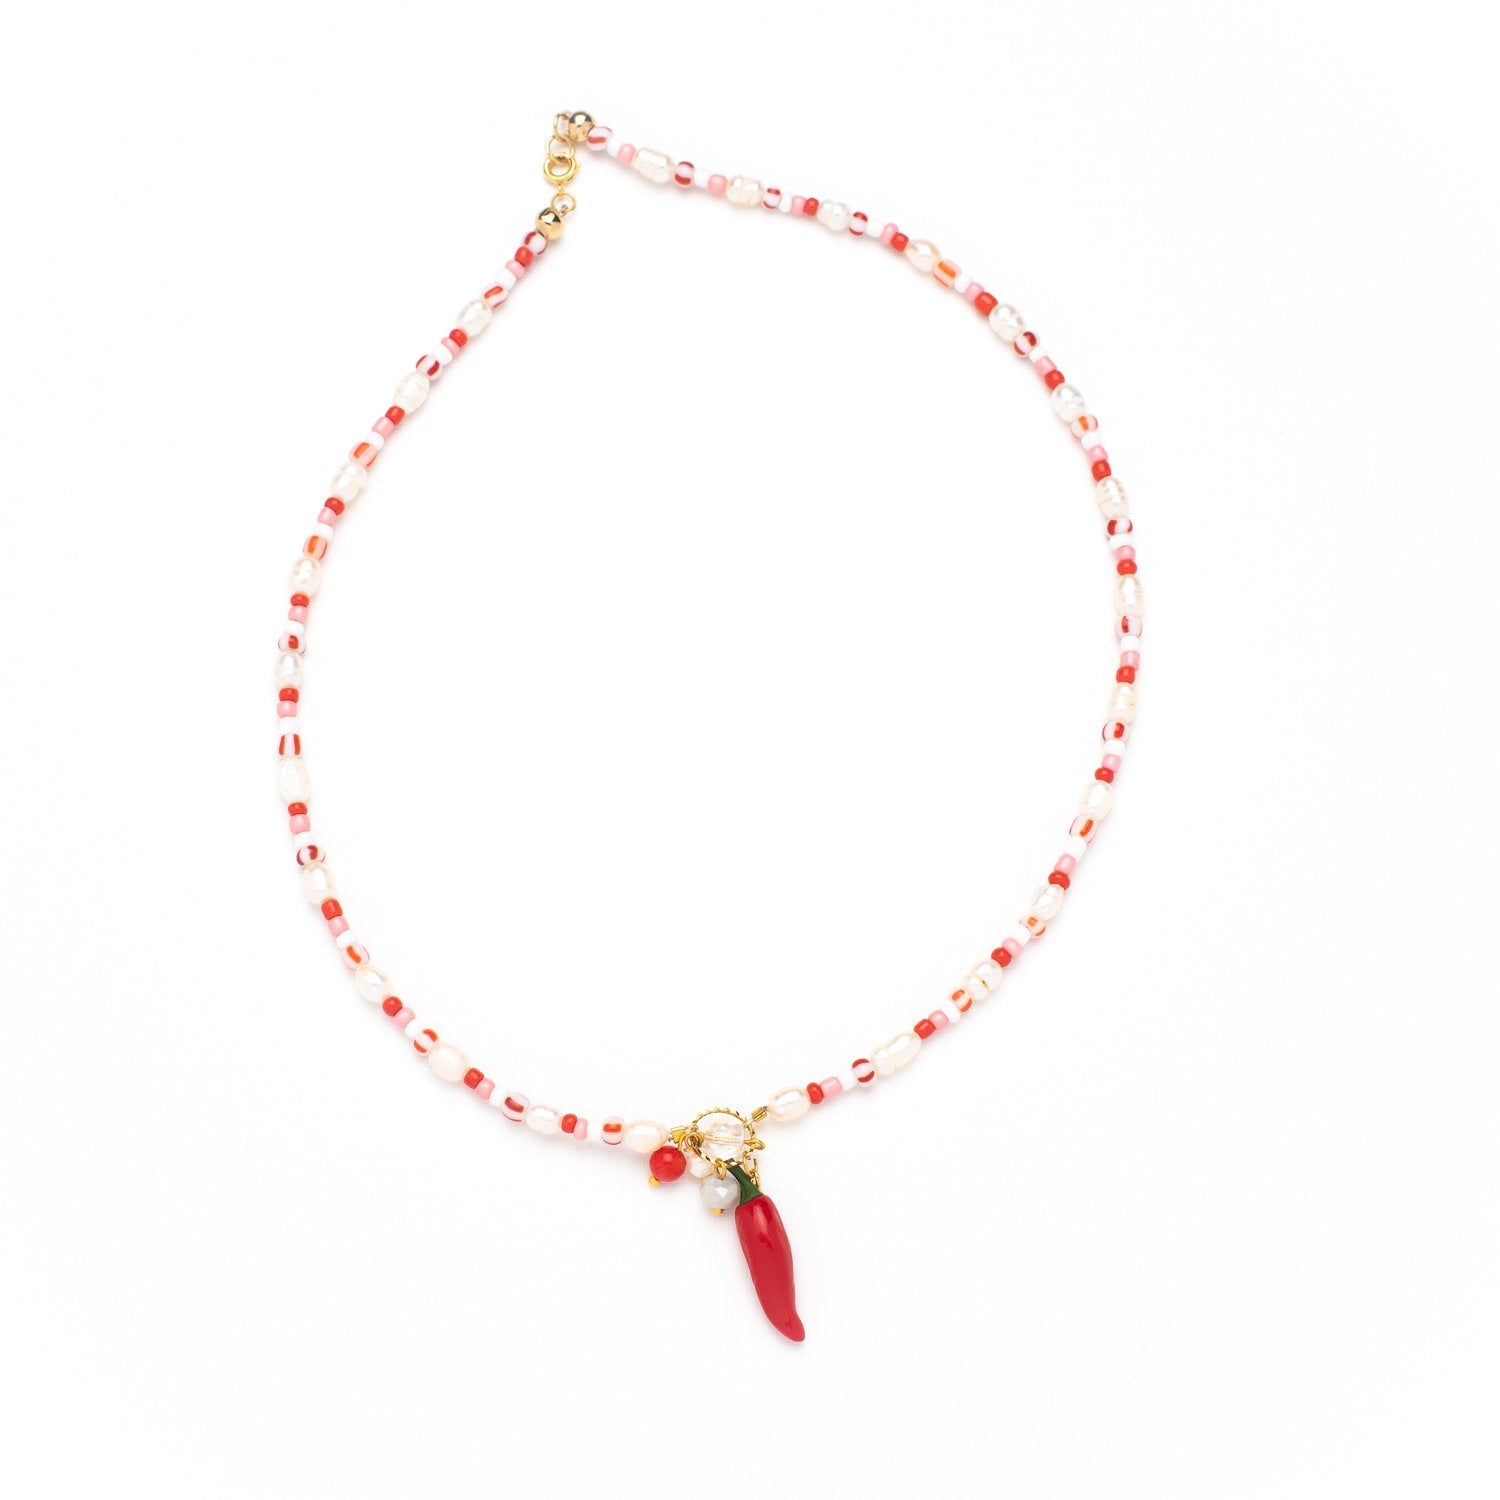 red hot chili pepper beads necklace